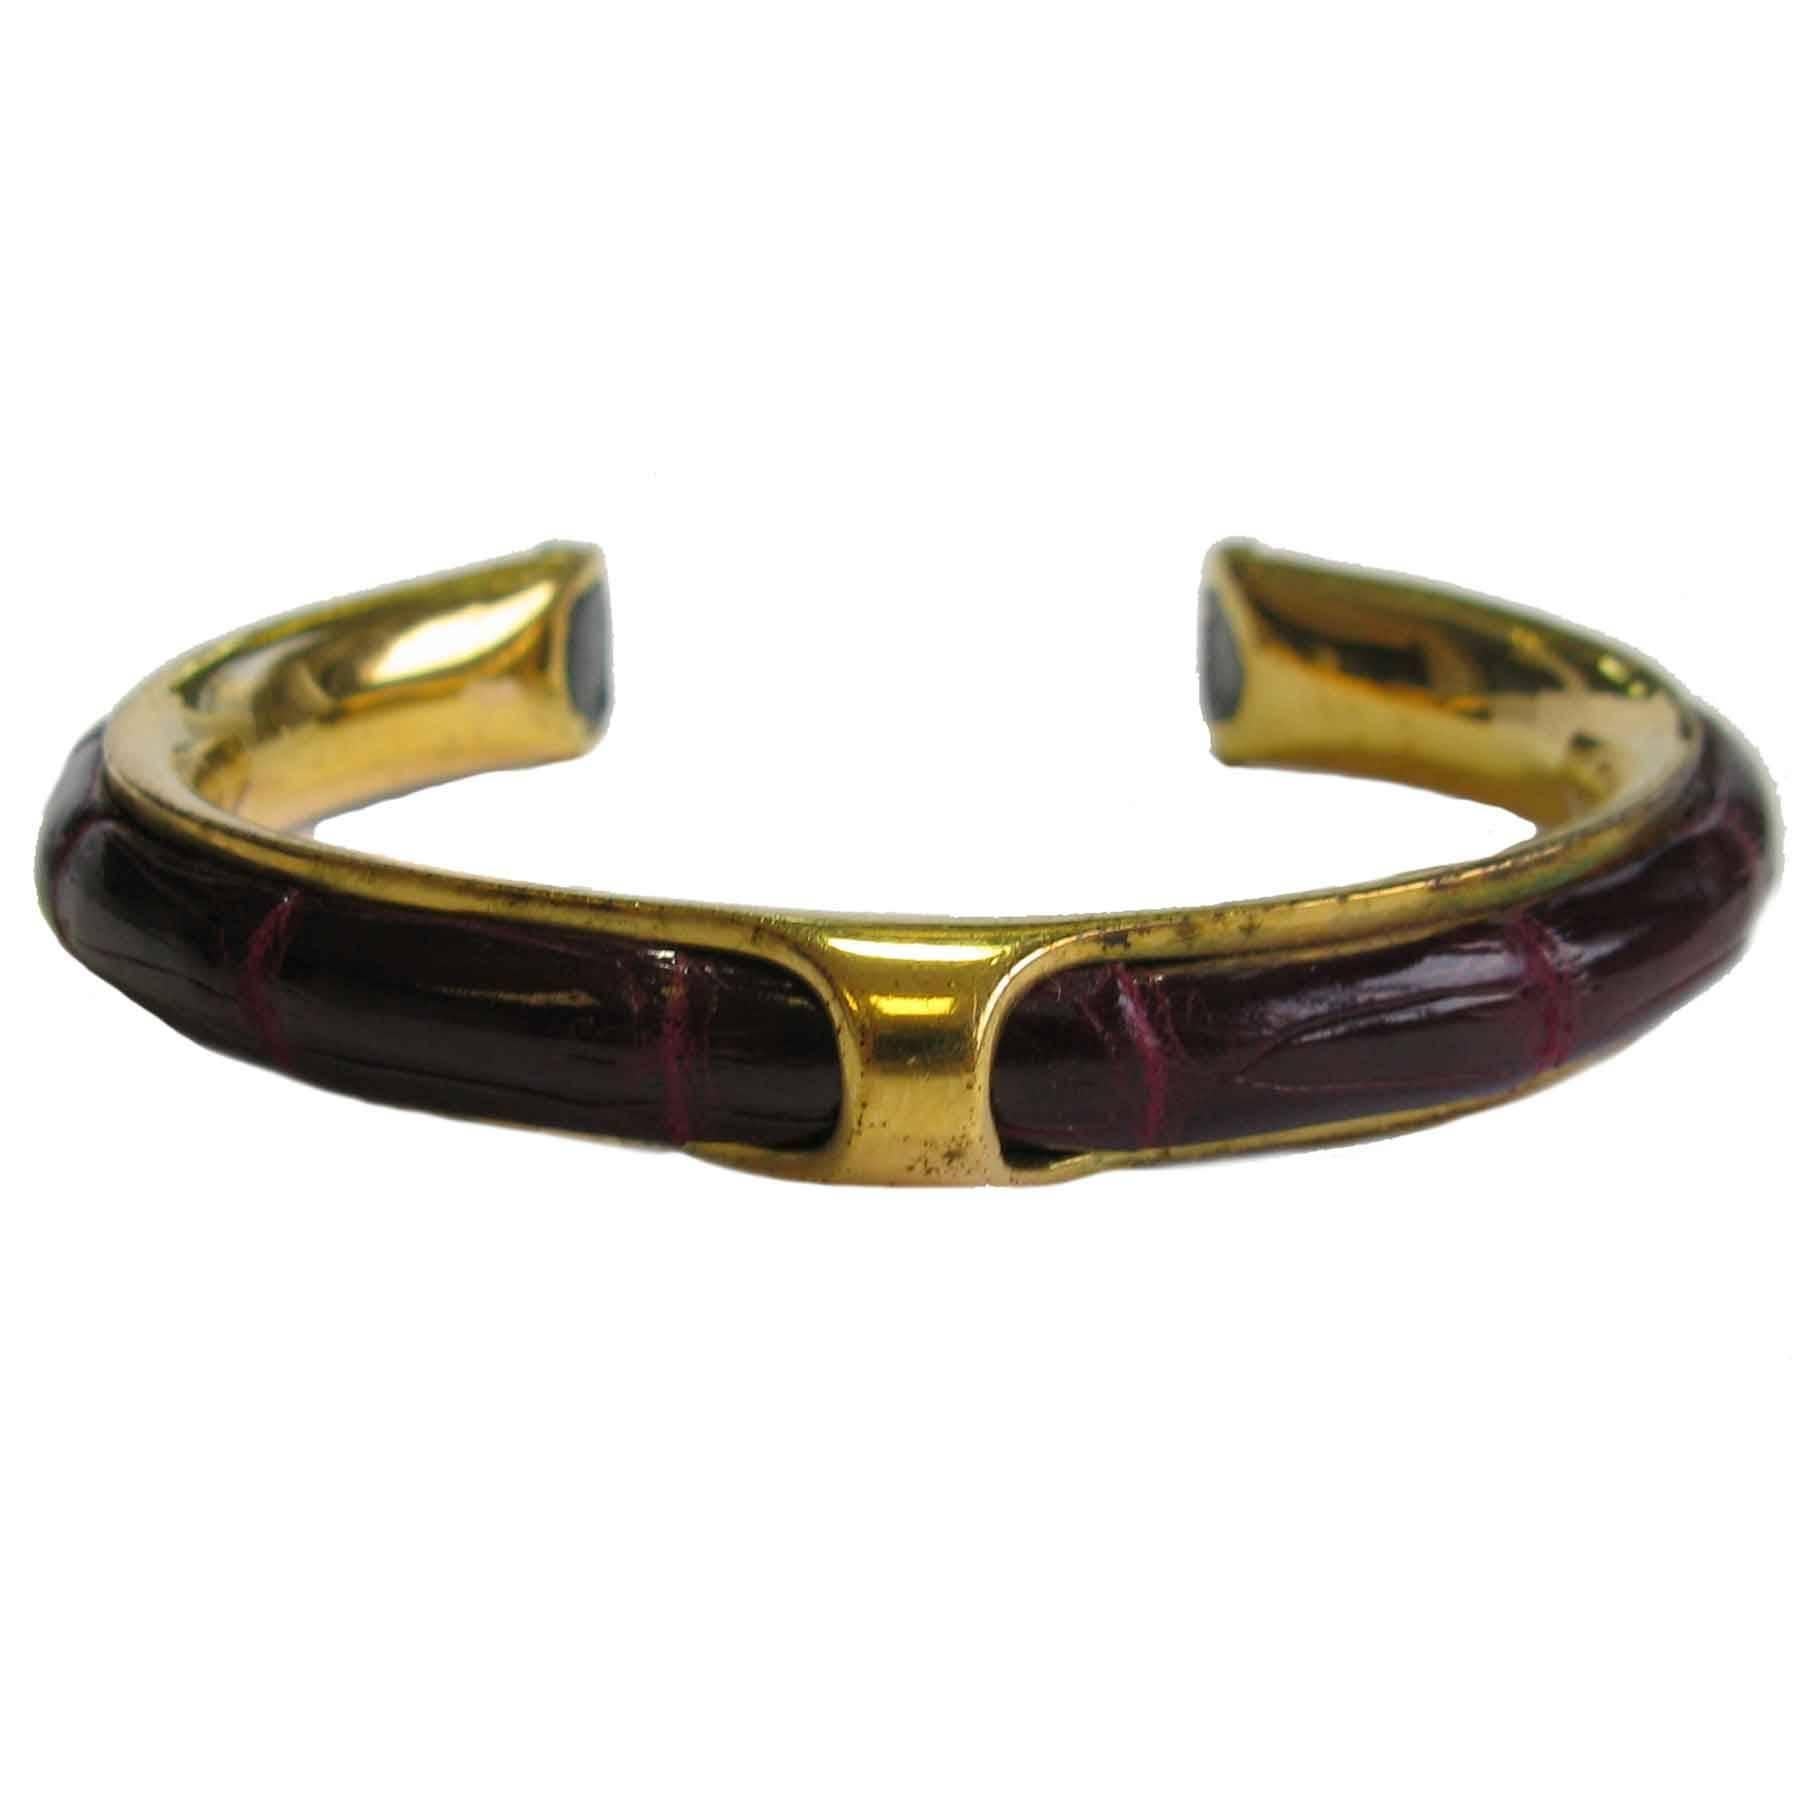 Vintage HERMES Bracelet in Gold Plated Metal and red H Crocodile Leather